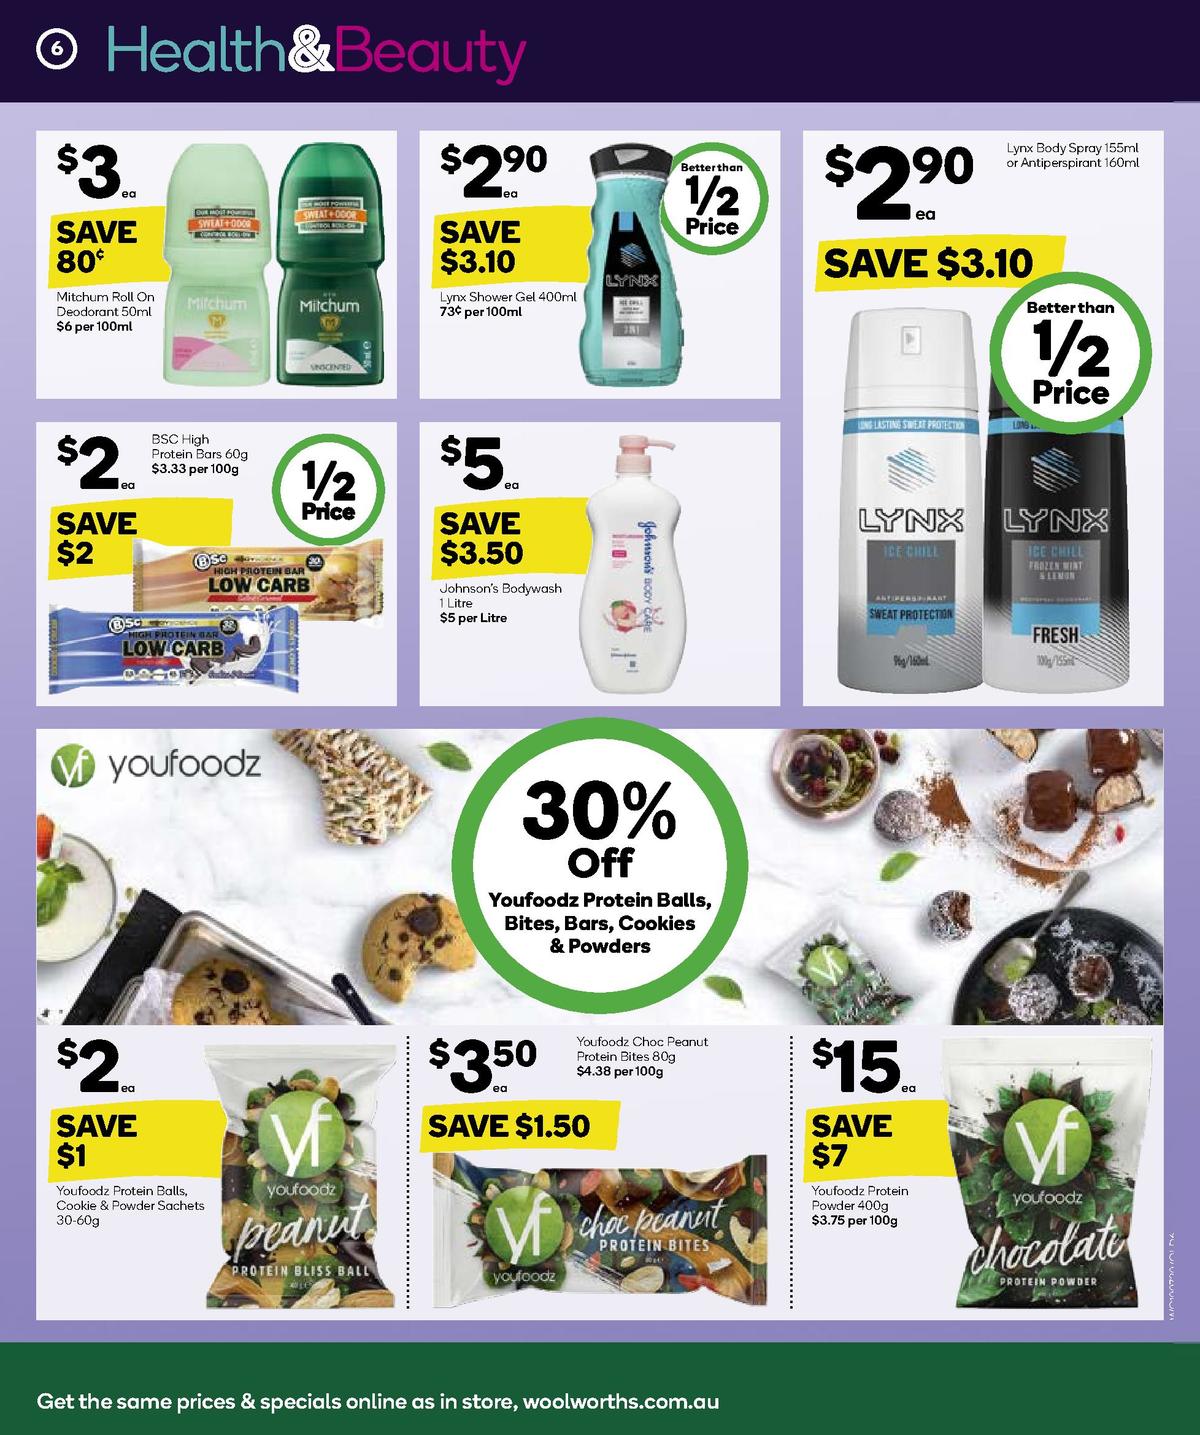 Woolworths Health & Beauty Catalogues from 10 July